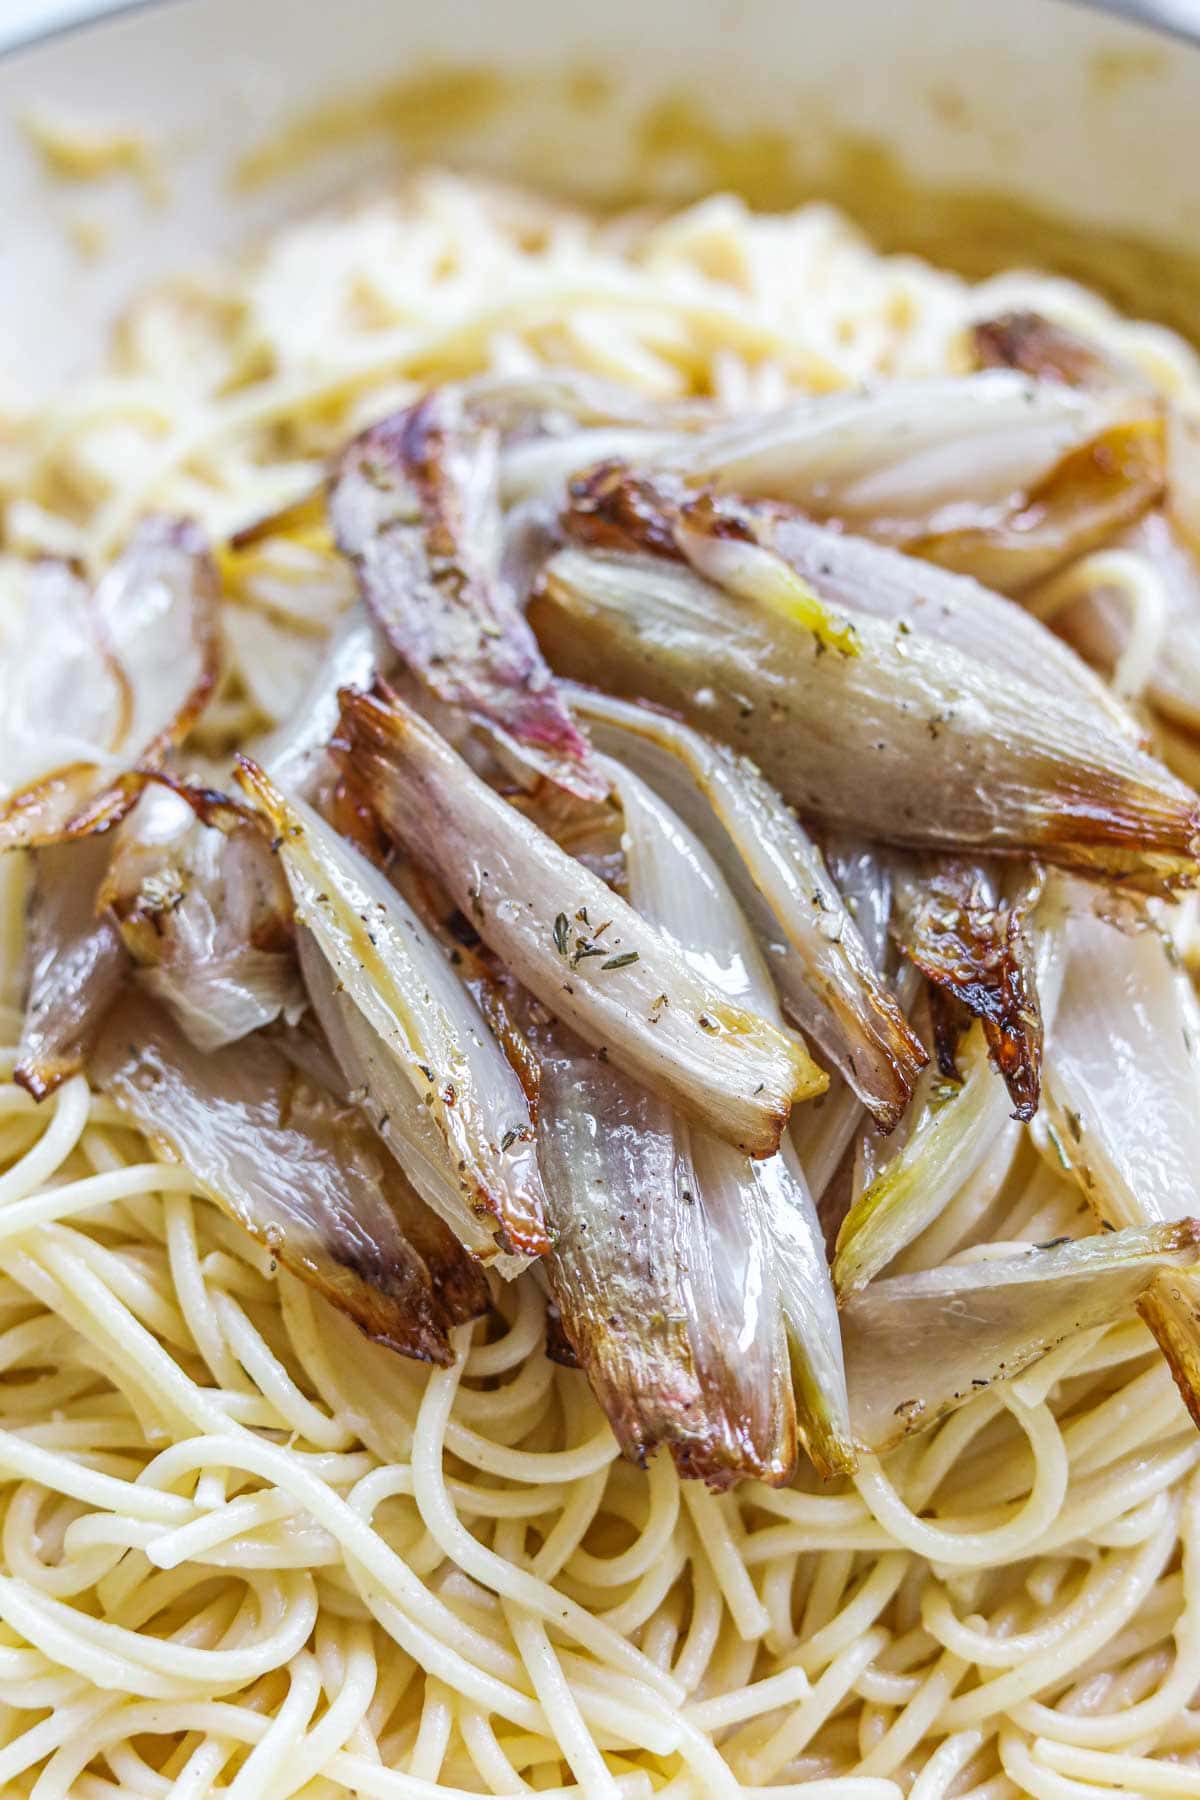 Roasted caramelized shallots with herbs on top of pasta.